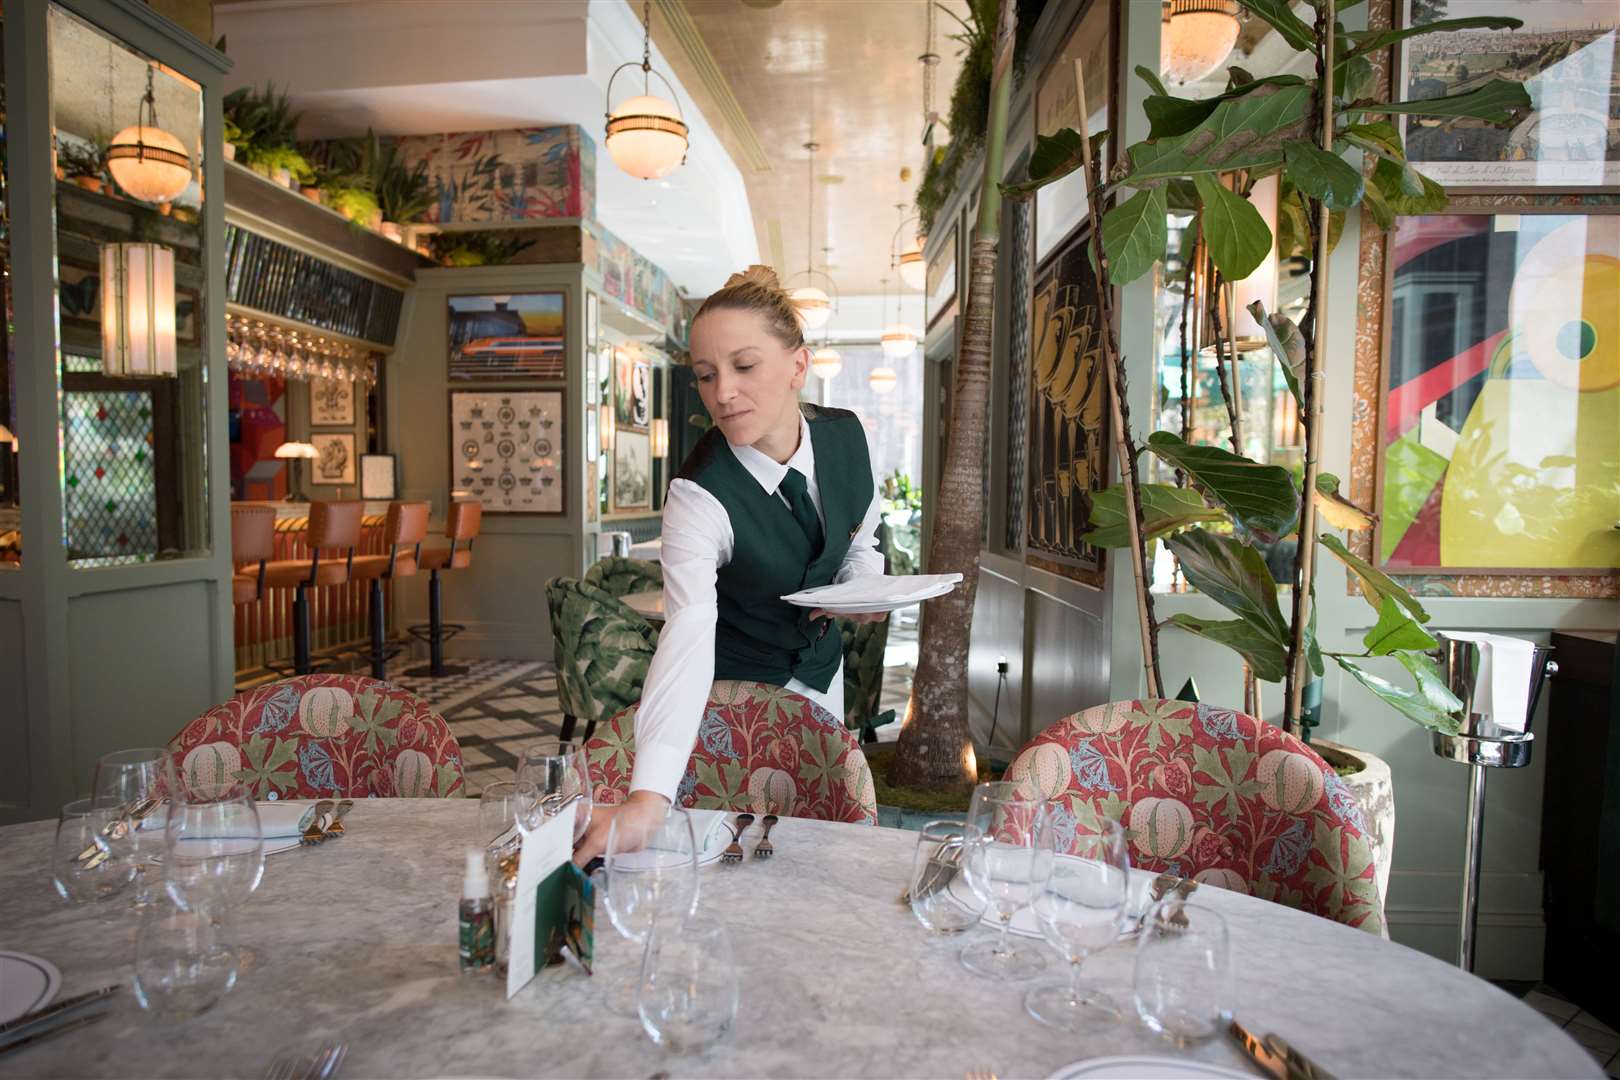 Staff at the Ivy Victoria in London prepare the dining area ahead of the final day of Eat Out to Help Out (Stefan Rousseau/PA)